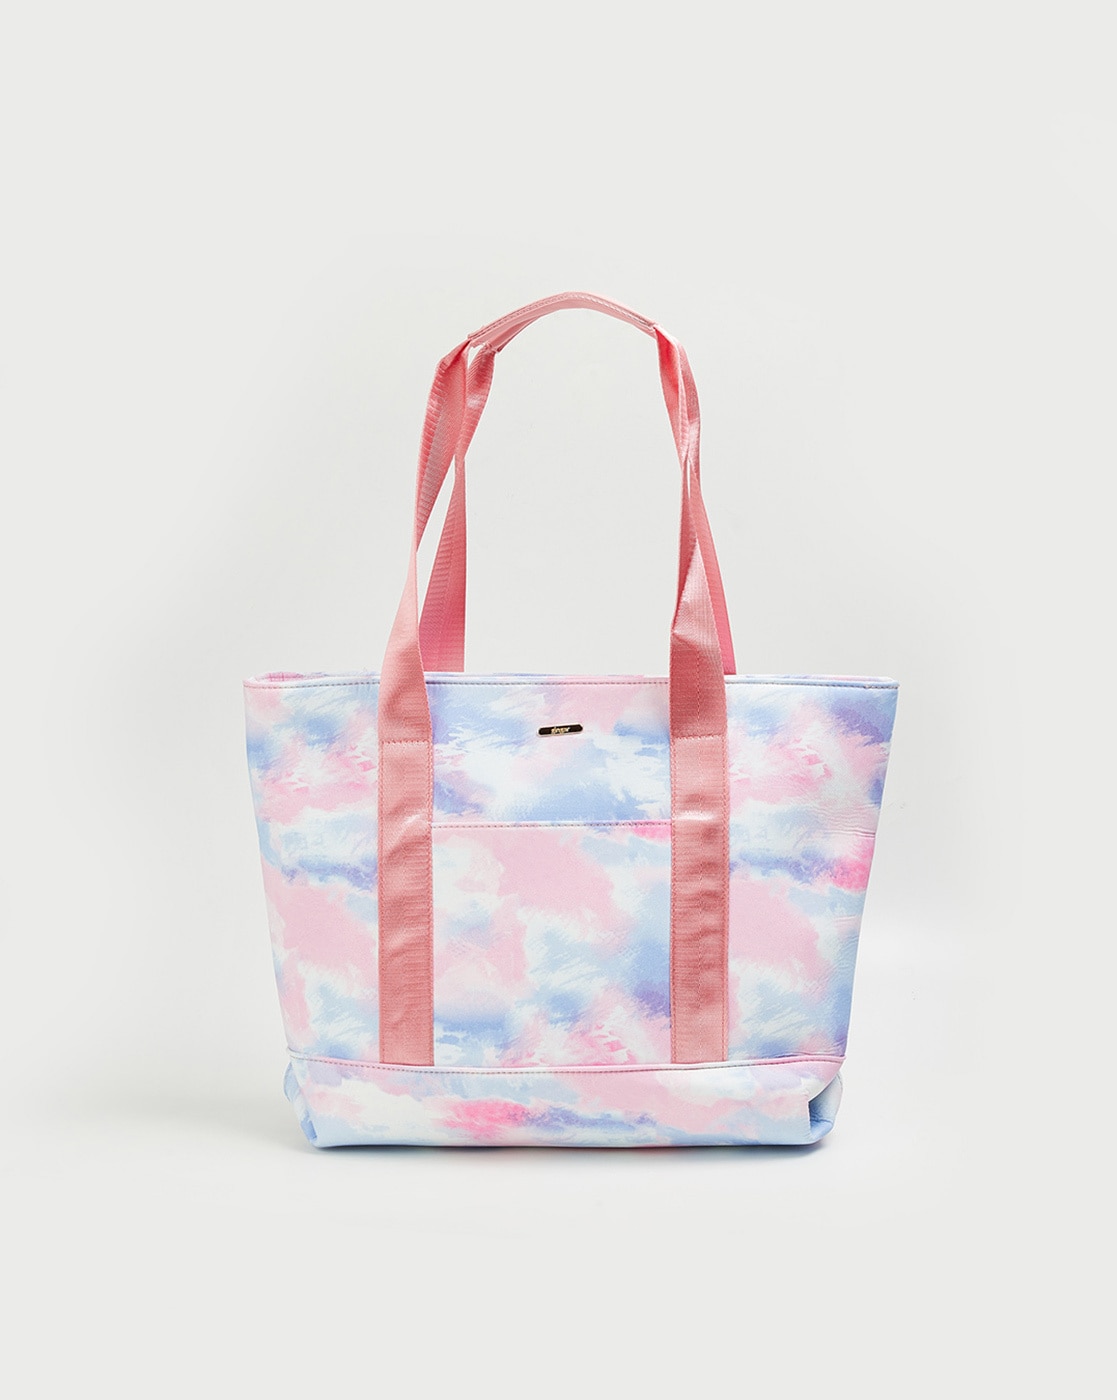 Muted Cool-Tone Tie Dye Bag | Earthbound Trading Co.